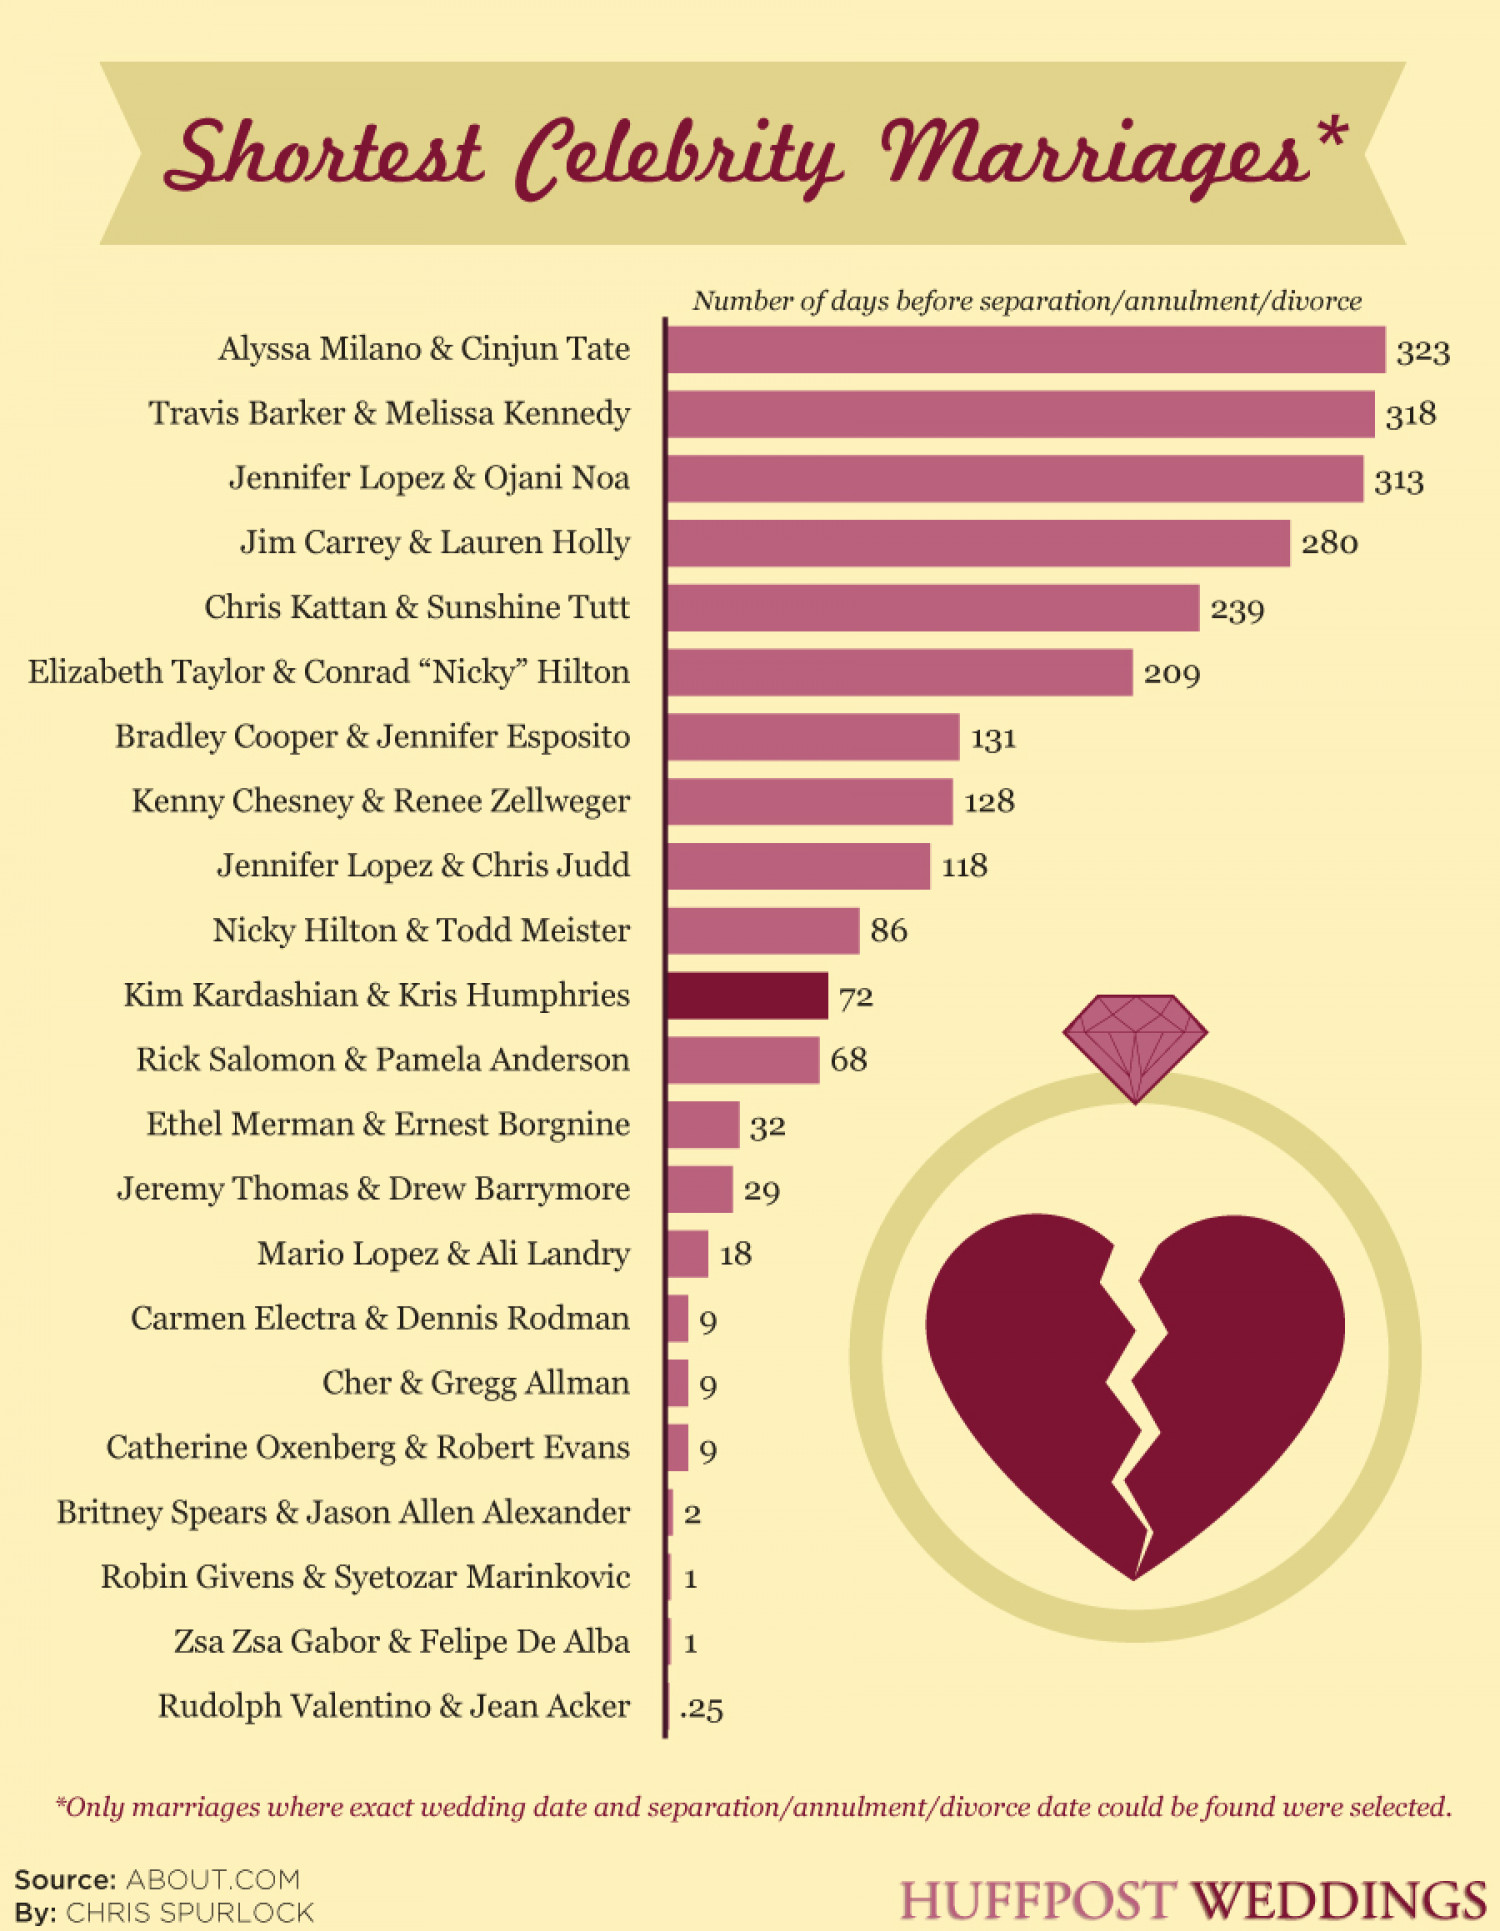 Shortest Celebrity Marriages  Infographic